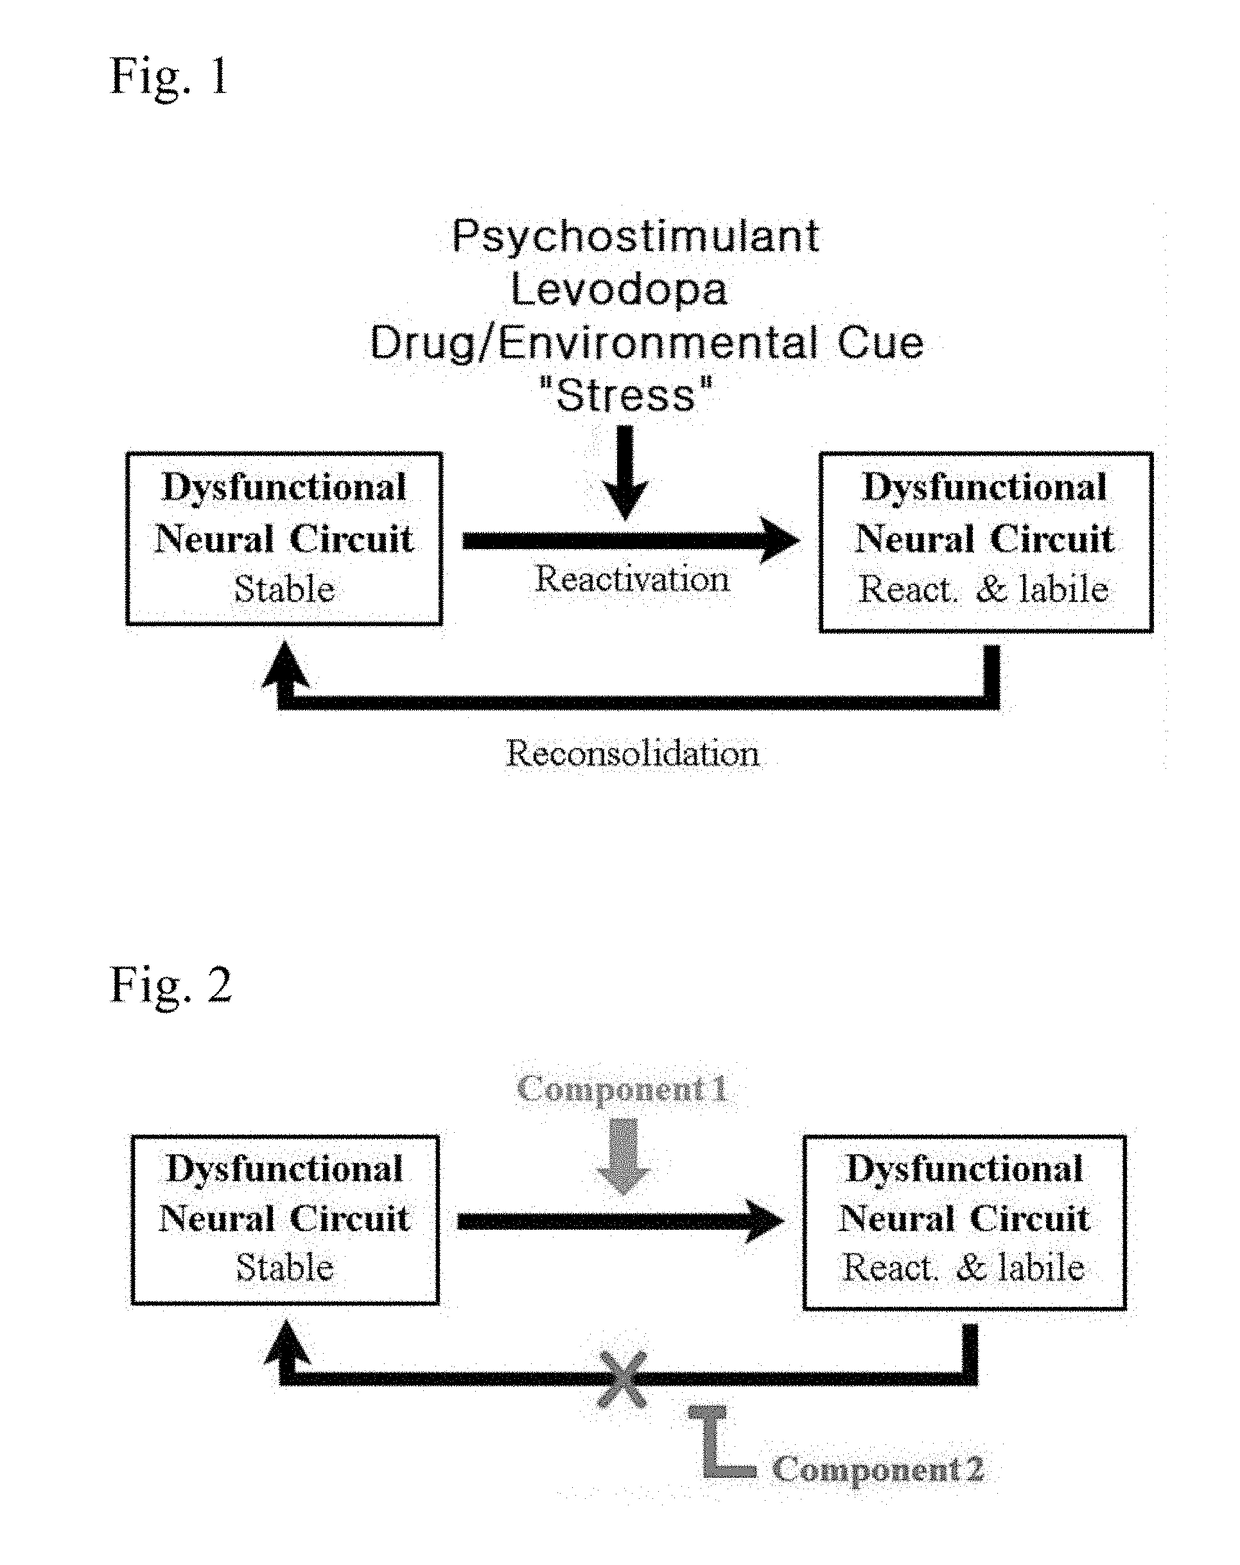 Composition and method for treatment of neuropsychiatric disorders